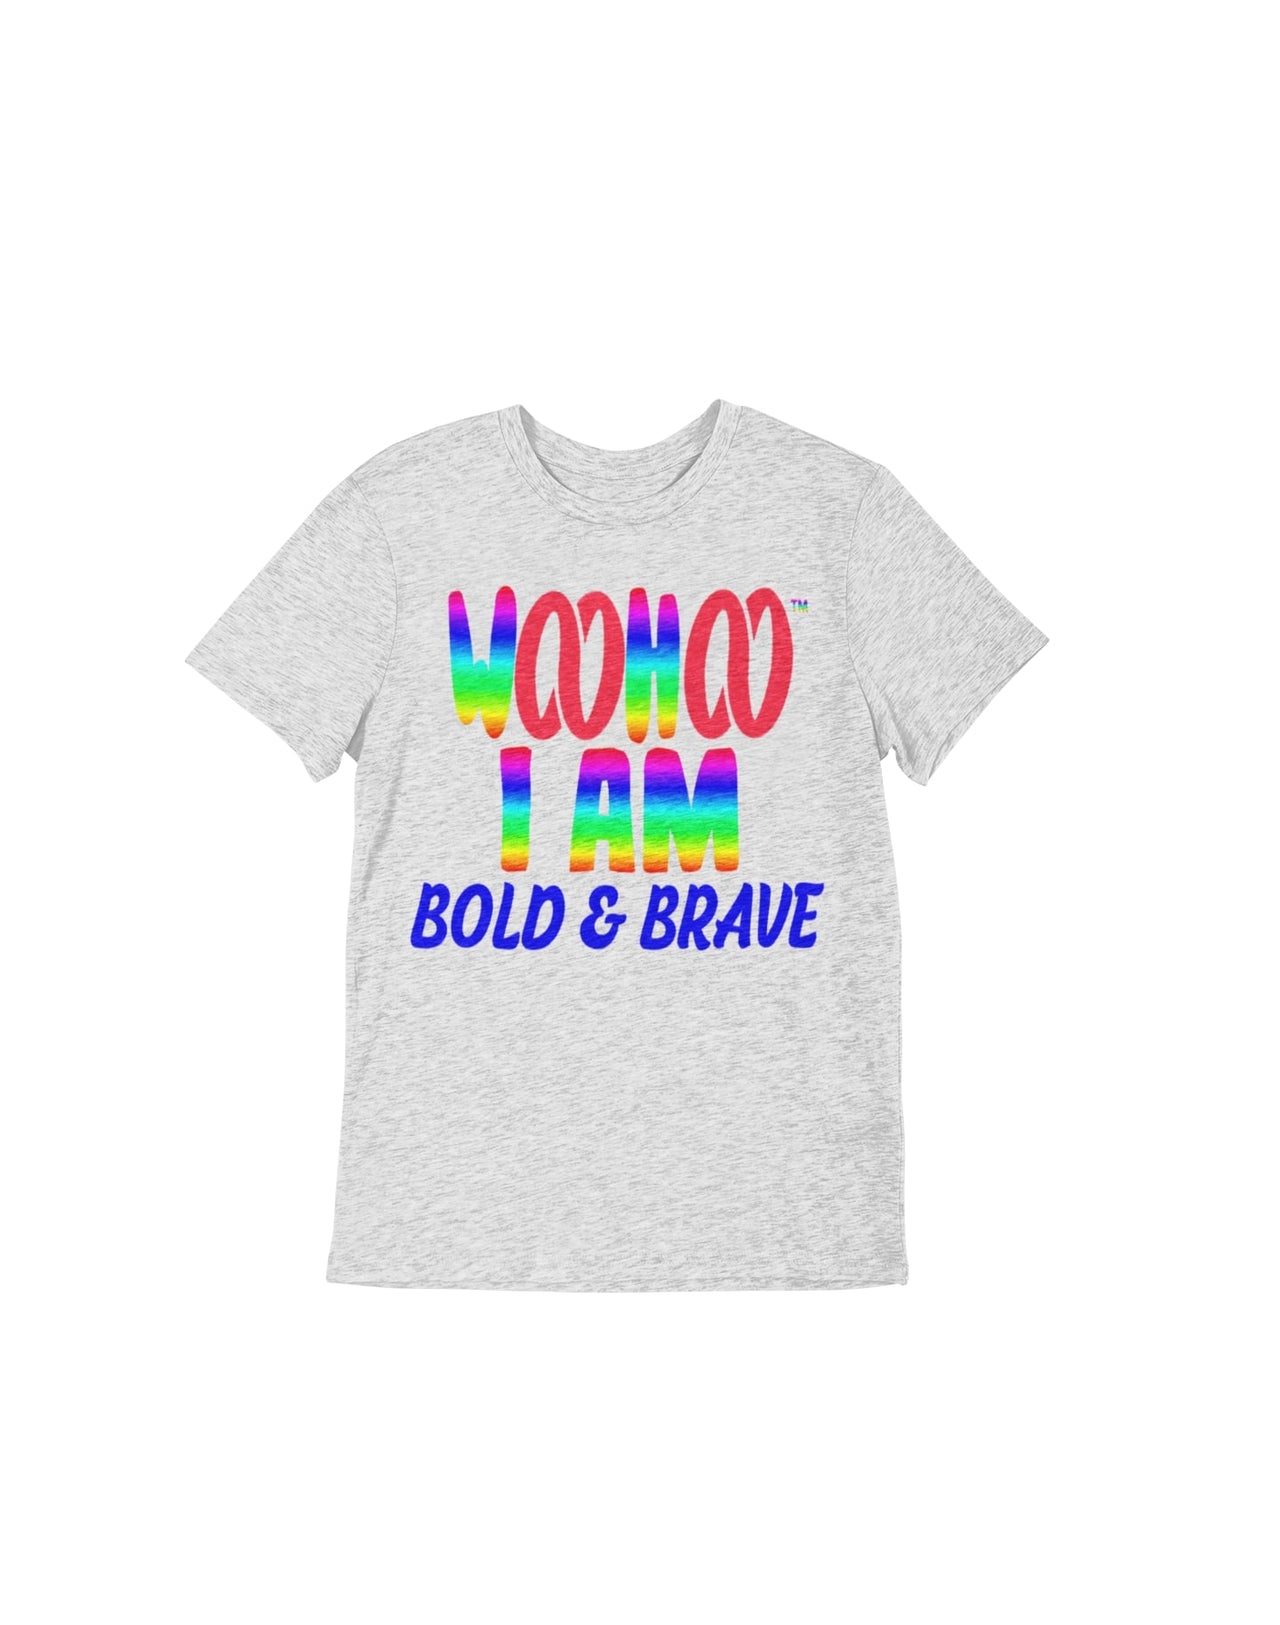 A heather gray unisex t-shirt designed by WooHoo Apparel.  The t-shirt features the text 'woohoo, "I am bold and brave" in cool-looking fonts, with the double 'oo' in 'woohoo' represented by a red double infinity symbol